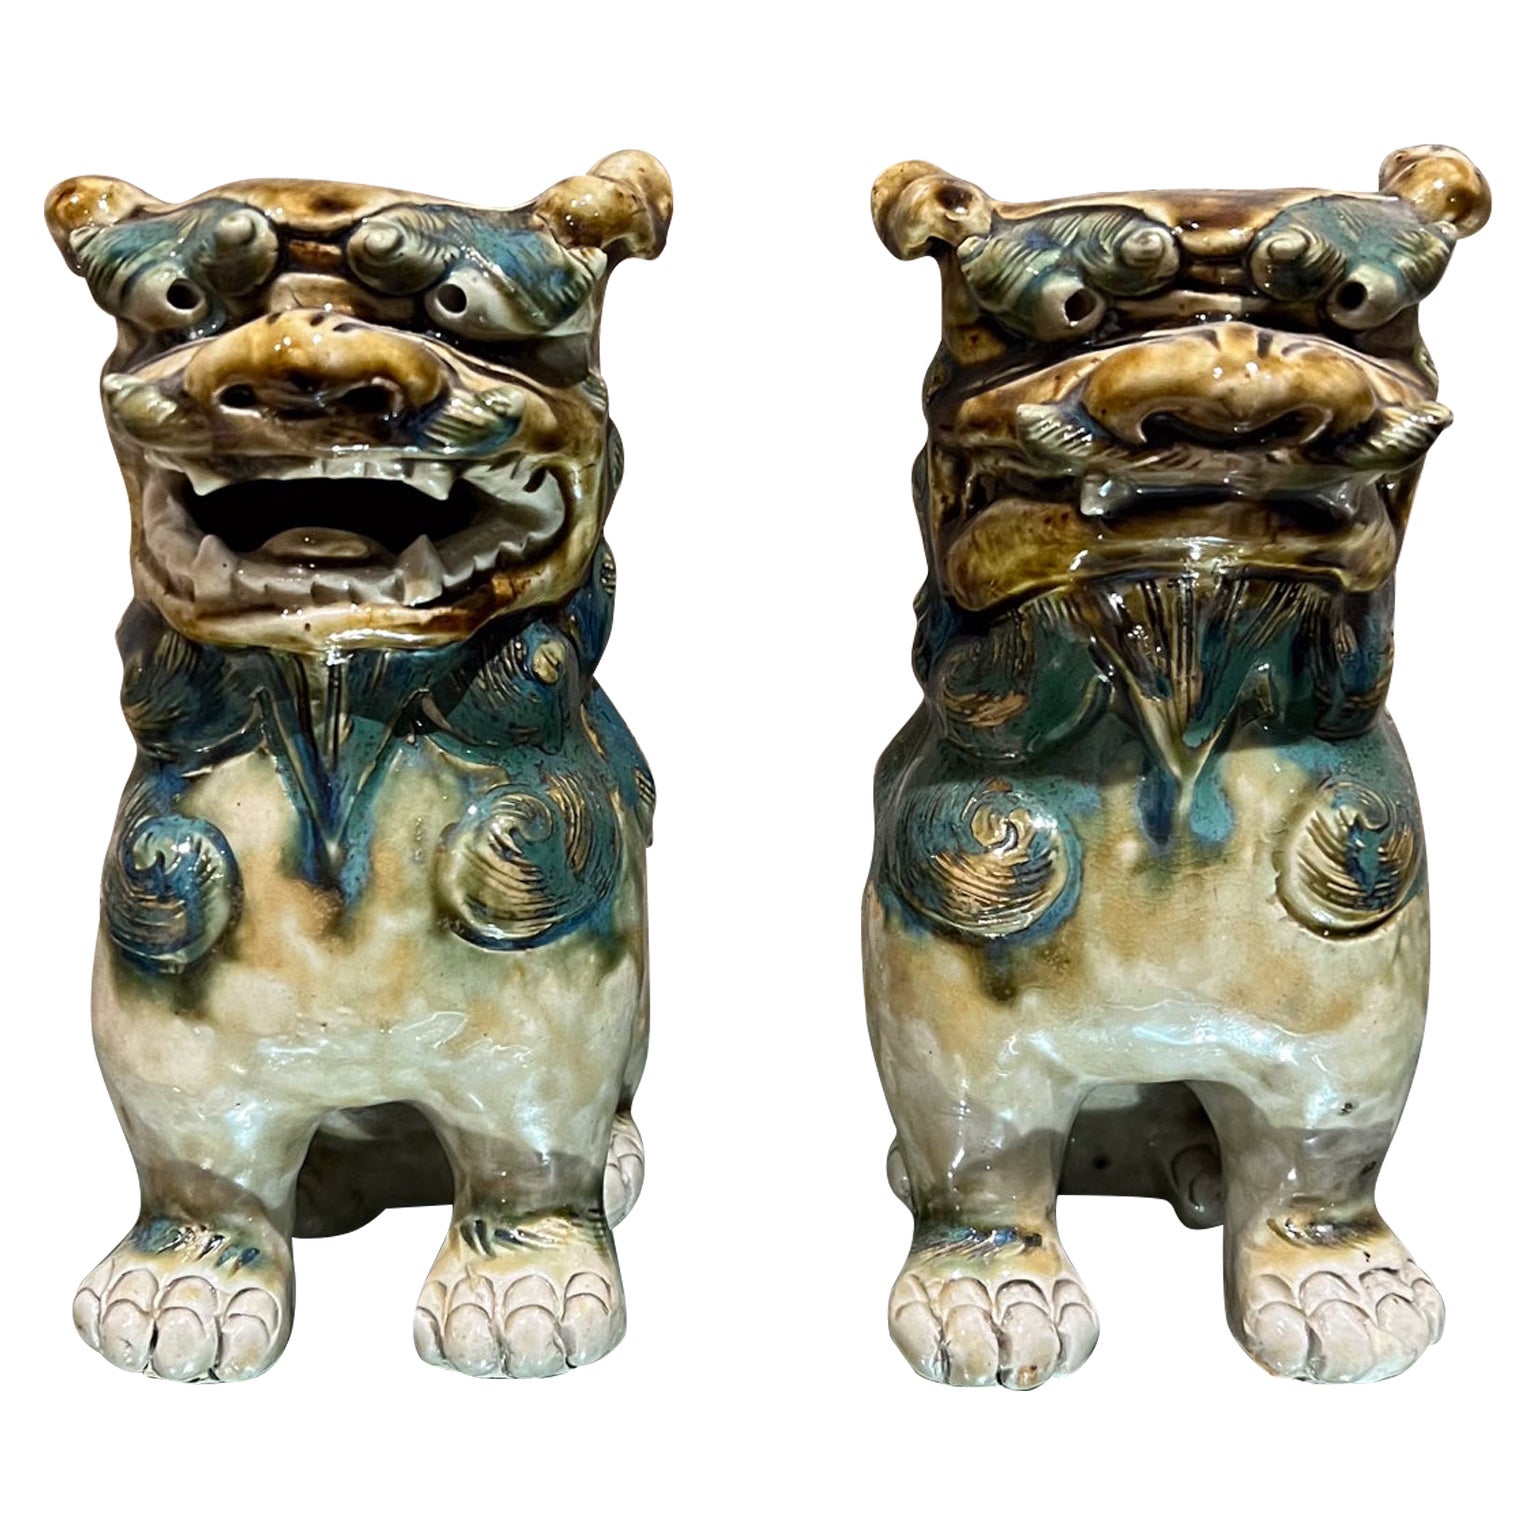 Are Chinese figurines small or large?